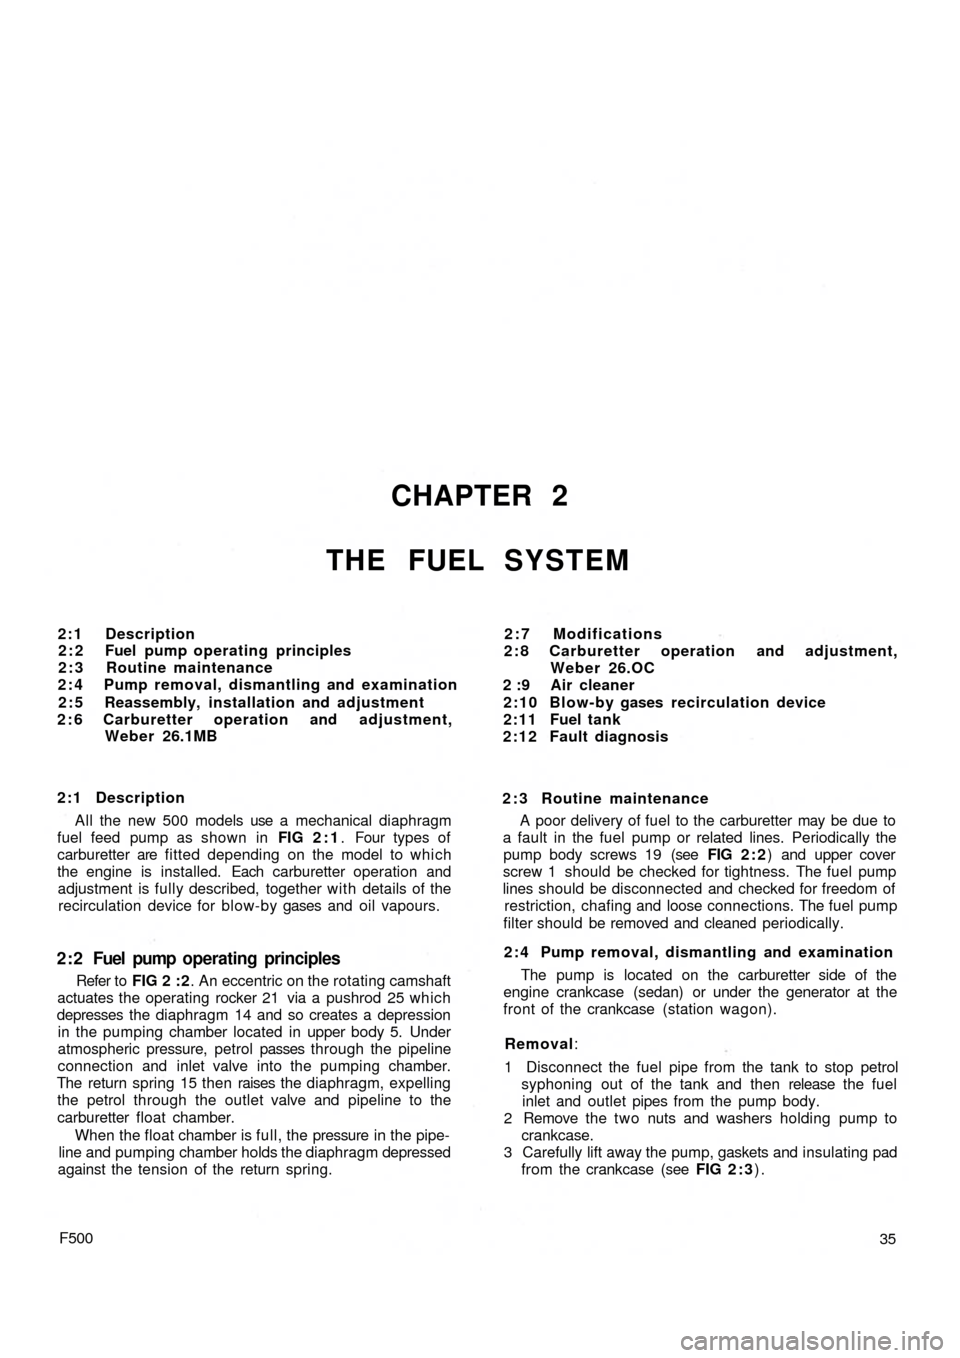 FIAT 500 1959 1.G Owners Manual CHAPTER 2
THE FUEL SYSTEM
2:1 Description
2 : 2 Fuel pump operating principles
2 : 3 Routine maintenance
2 : 4 Pump removal, dismantling and examination
2 : 5 Reassembly, installation and adjustment
2